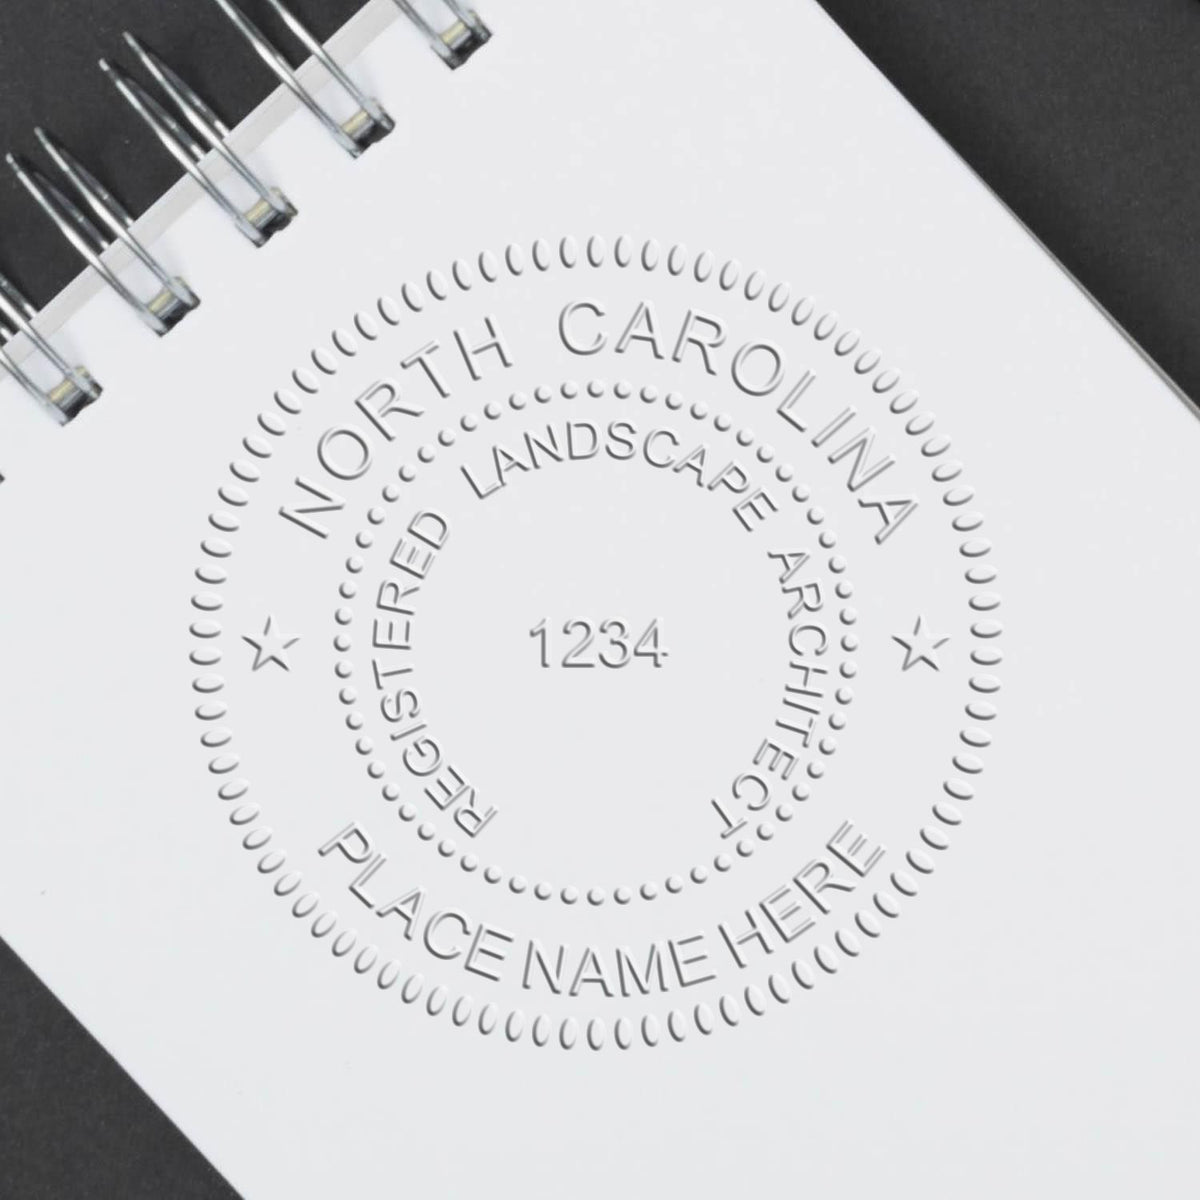 The Gift North Carolina Landscape Architect Seal stamp impression comes to life with a crisp, detailed image stamped on paper - showcasing true professional quality.